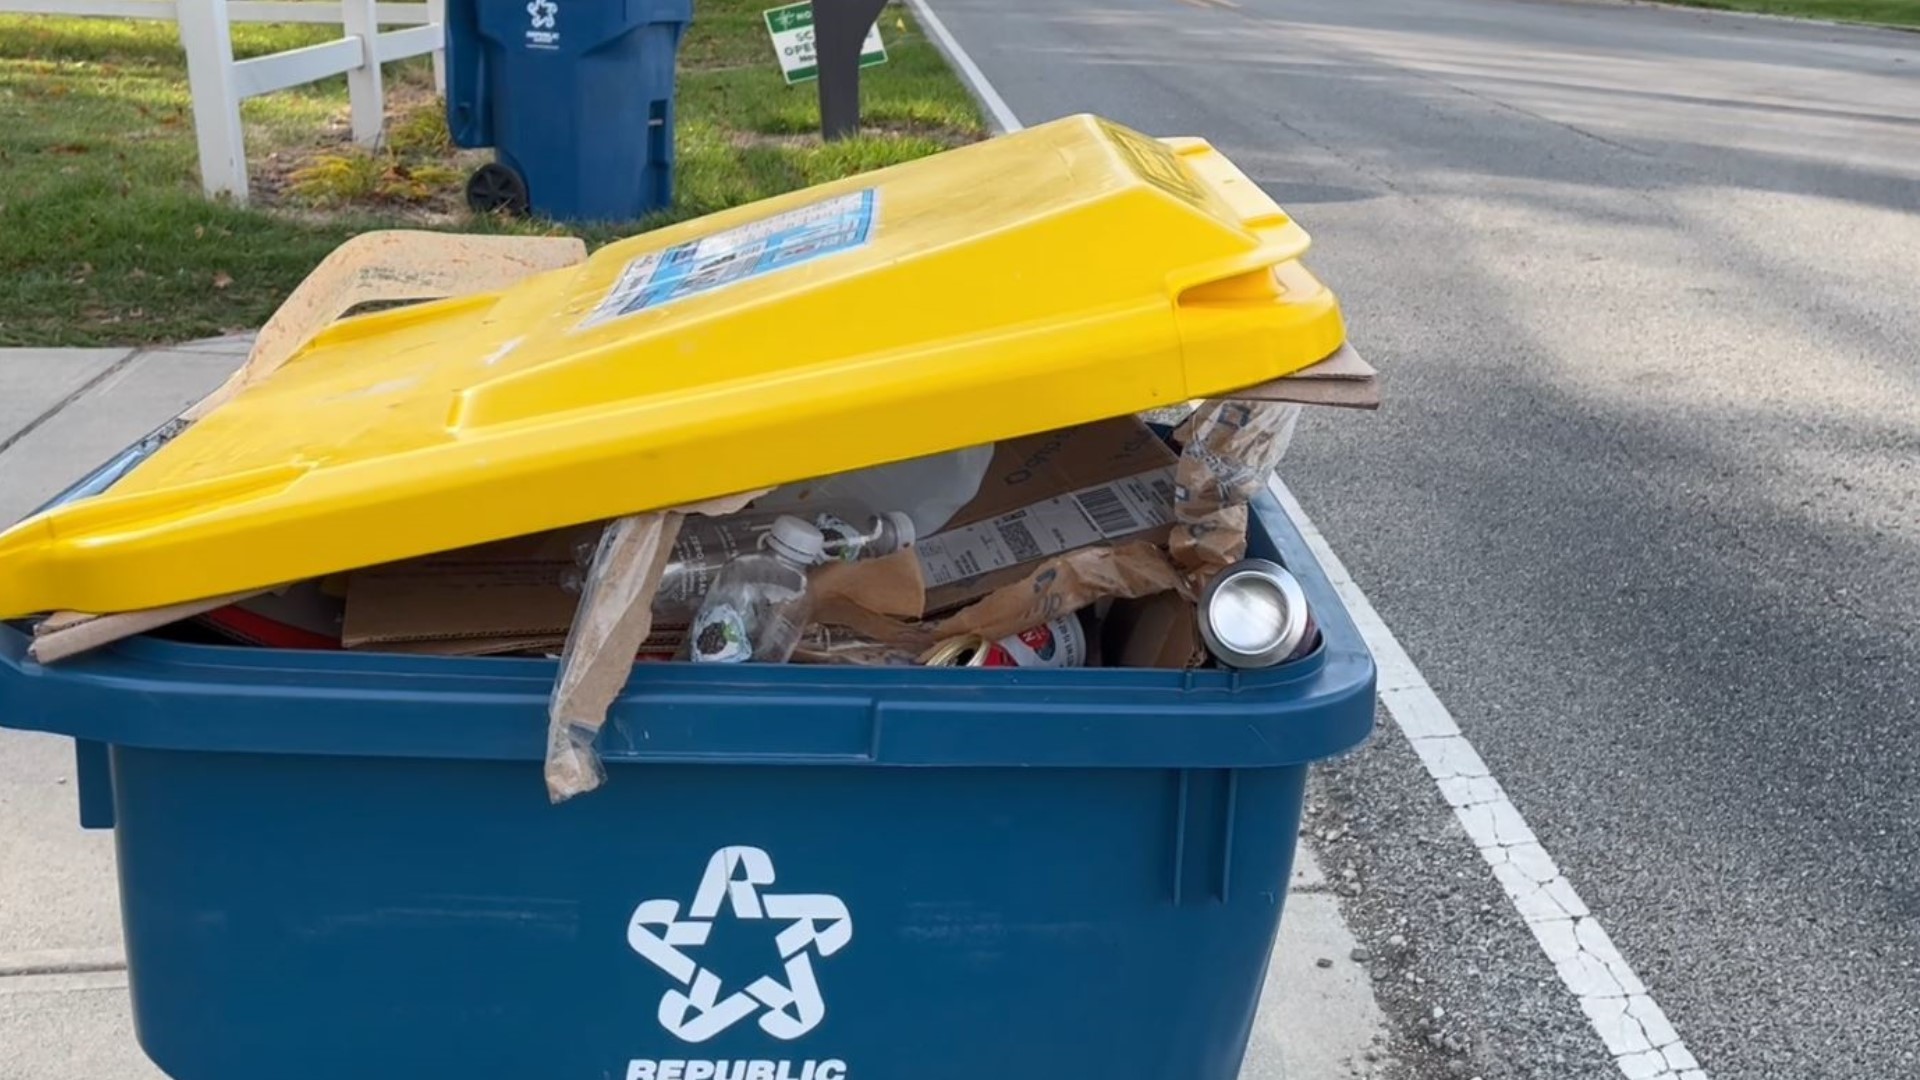 Indian River wants to curb misuse of blue recycling carts as trash cans